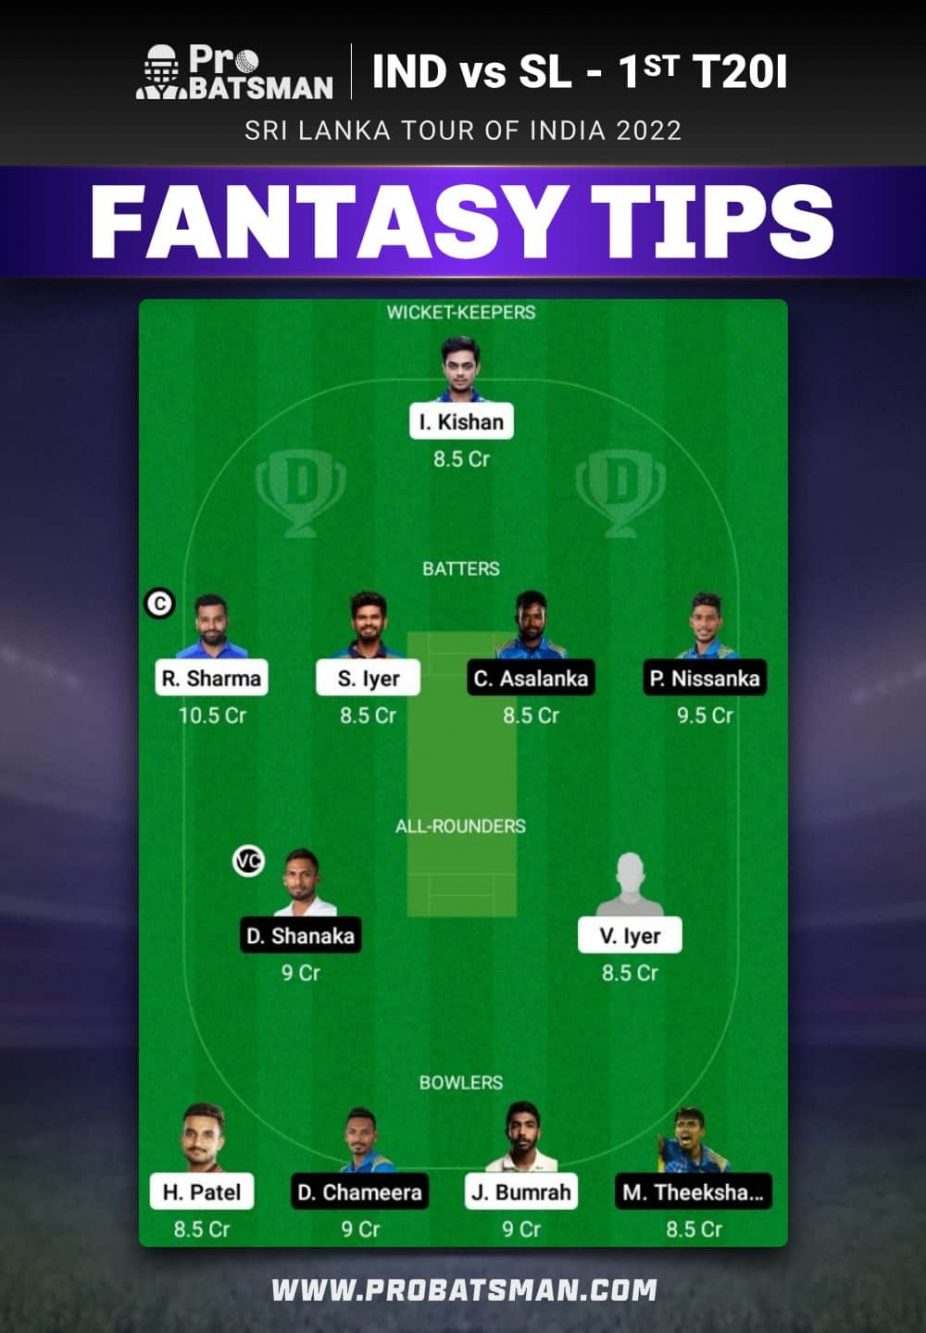 IND vs SL Dream11 Prediction With Stats, Pitch Report & Player Record of Sri Lanka Tour of India, 2022 For 1st T20I